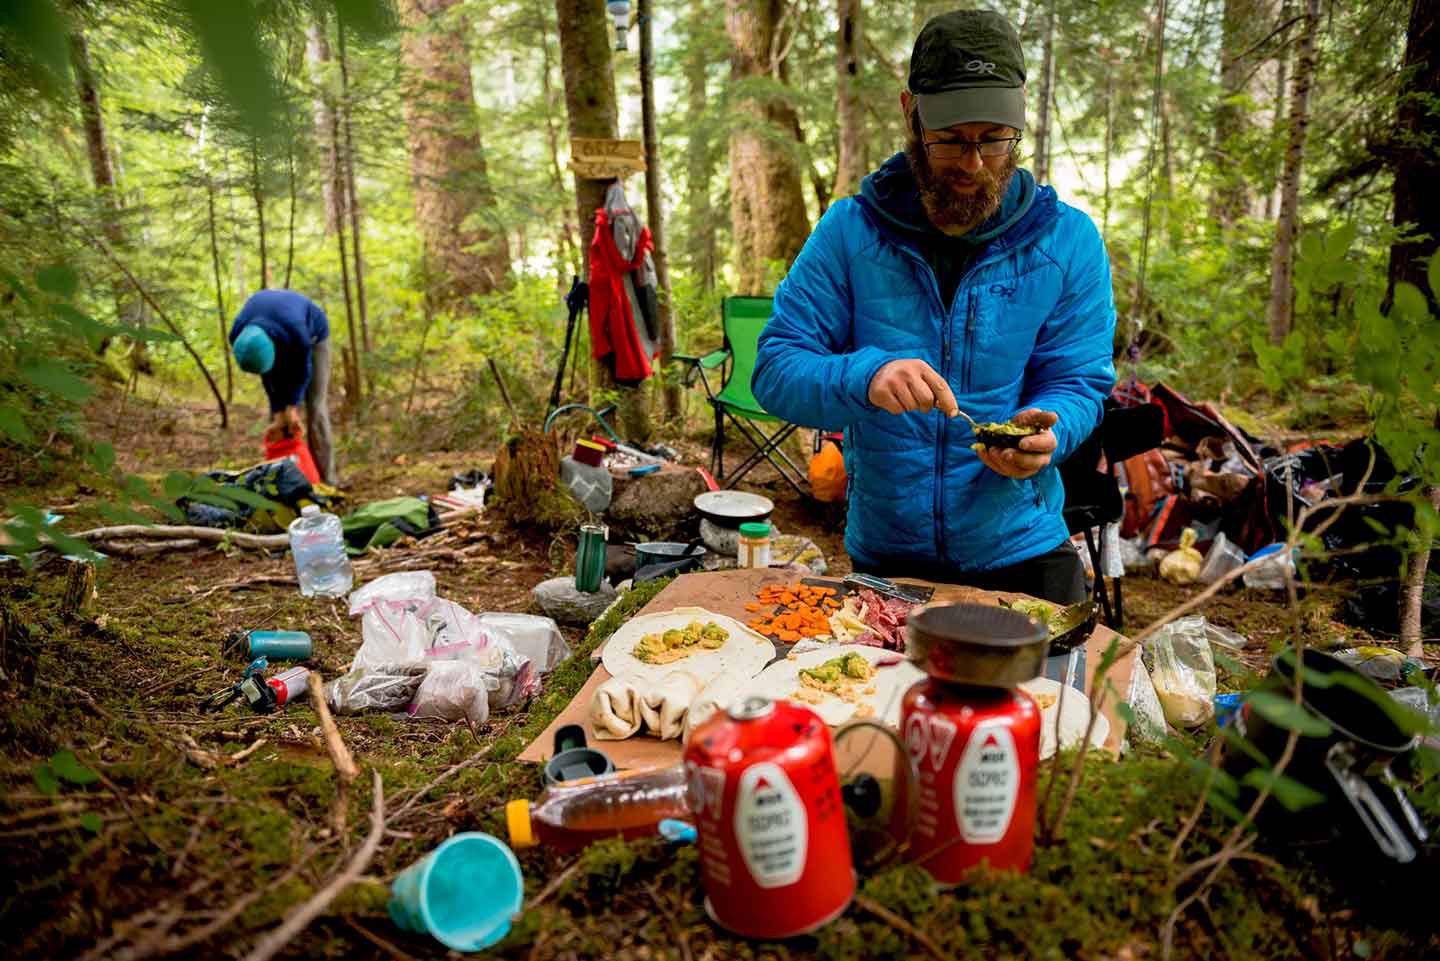 Love Hiking? Hate Lugging Heavy Stuff? You Need These Food